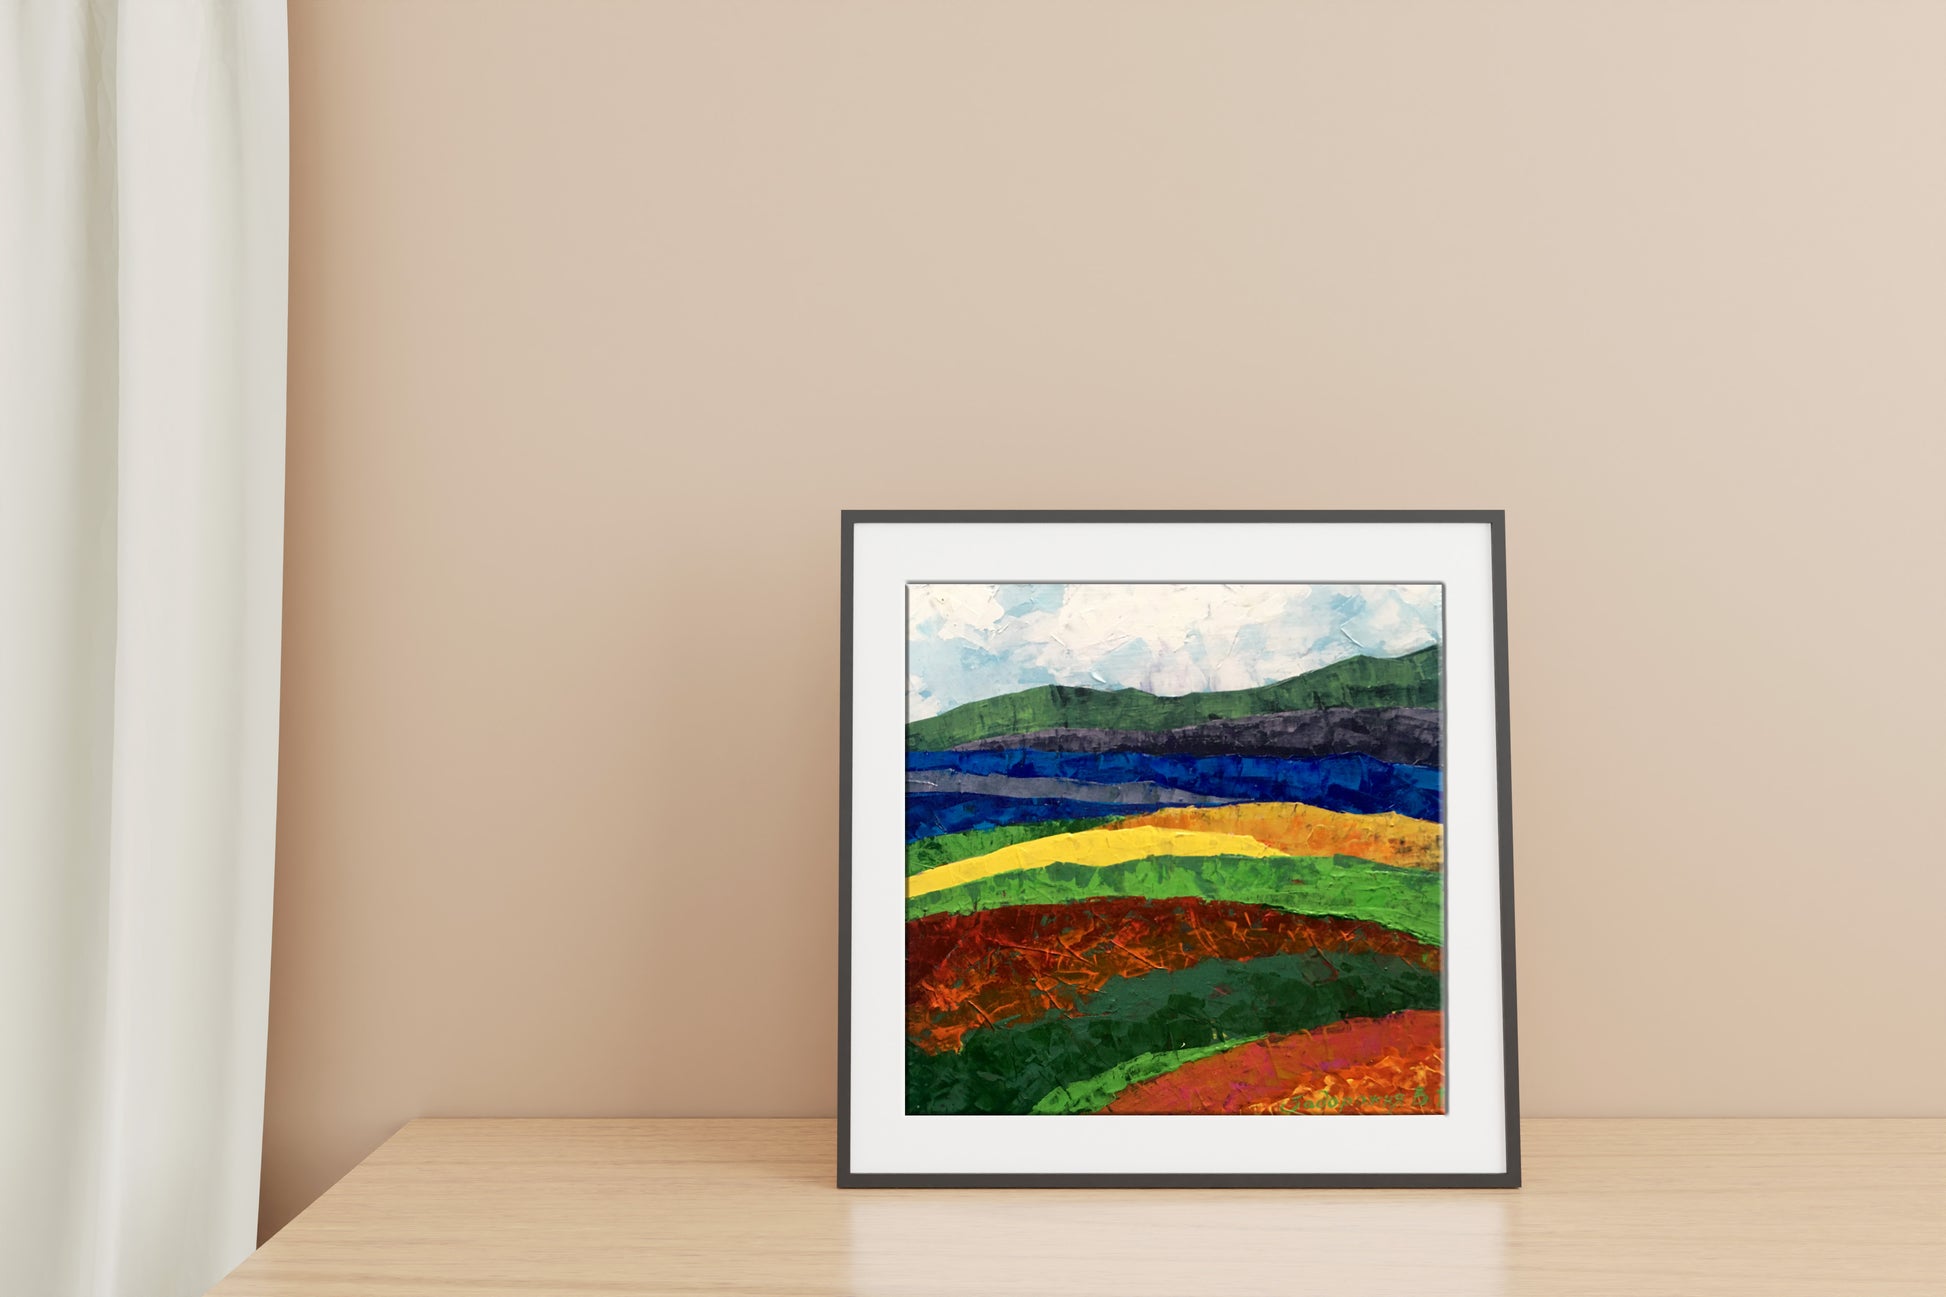 Oil artwork featuring "Mountain Colored Fields" by V. Zadorozhnya